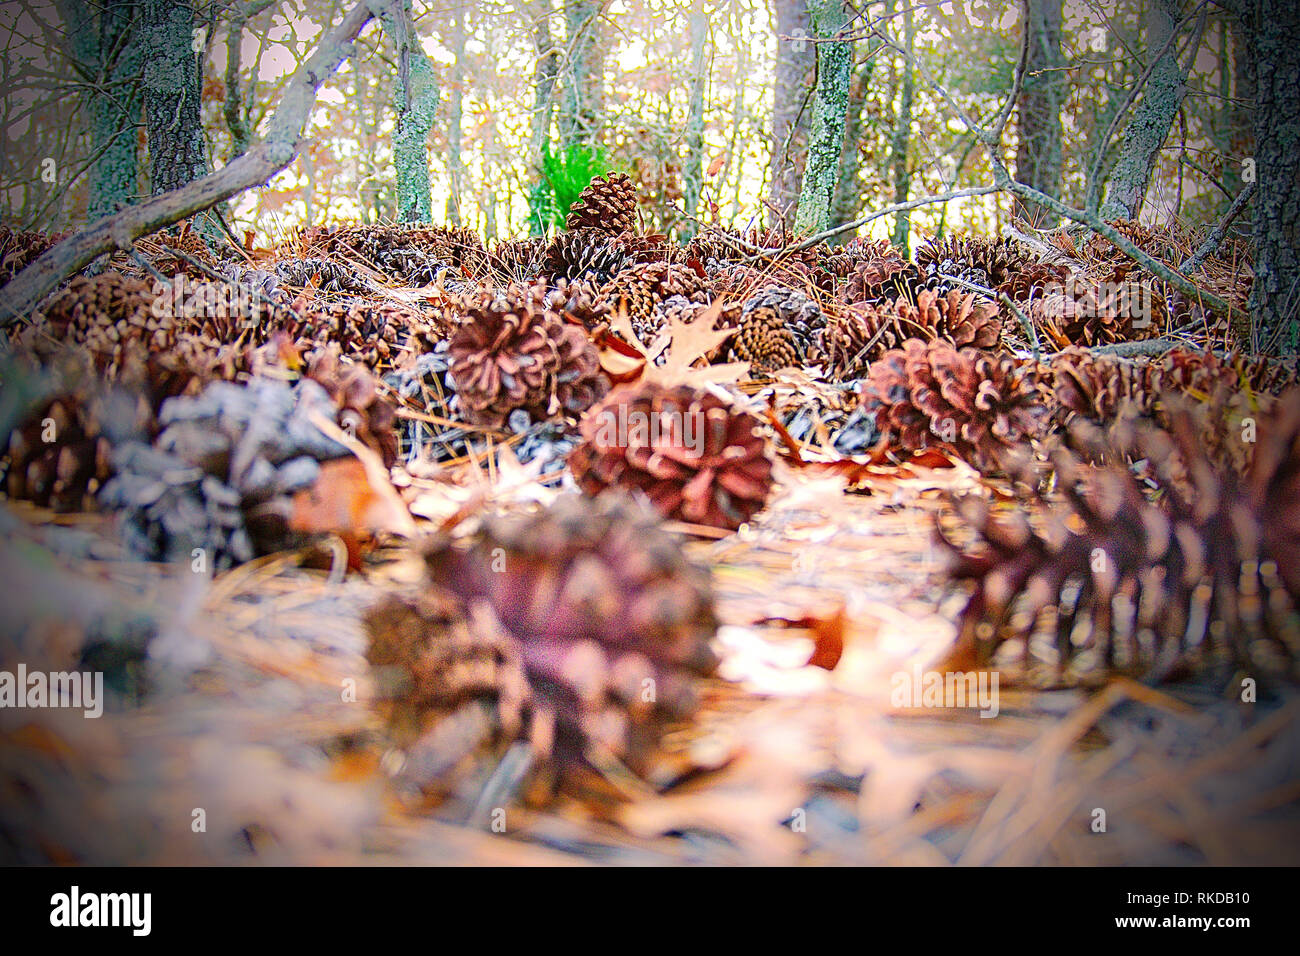 Close-up of many pinecones on the forest floor with beautiful colors and a barely visible structure in the background. Stock Photo